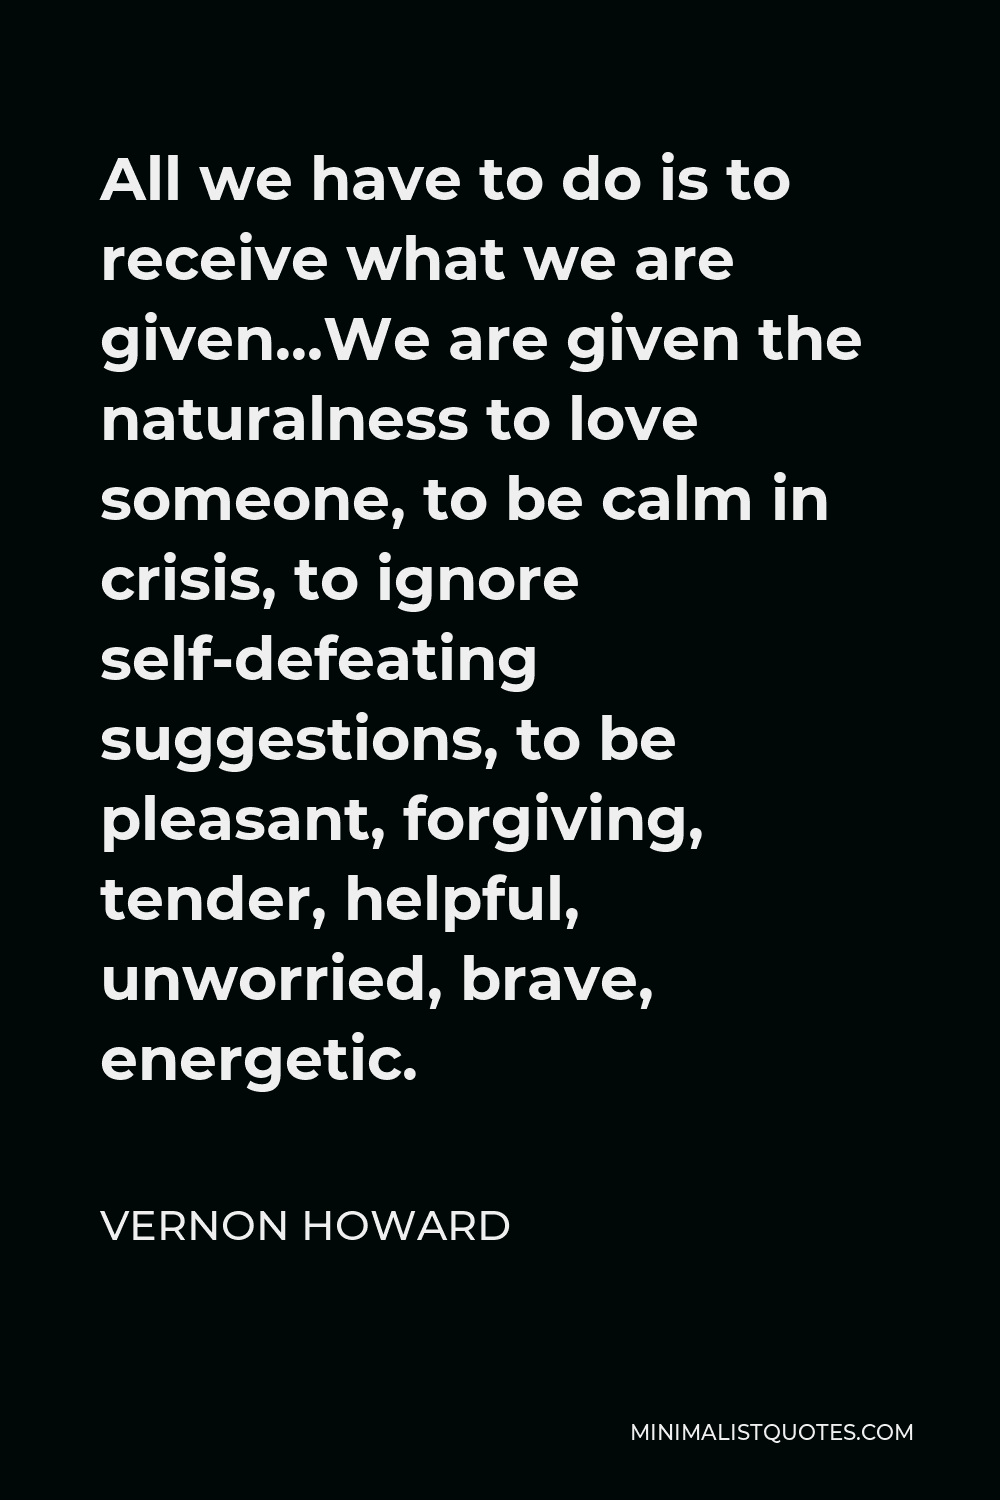 Vernon Howard Quote - All we have to do is to receive what we are given…We are given the naturalness to love someone, to be calm in crisis, to ignore self-defeating suggestions, to be pleasant, forgiving, tender, helpful, unworried, brave, energetic.